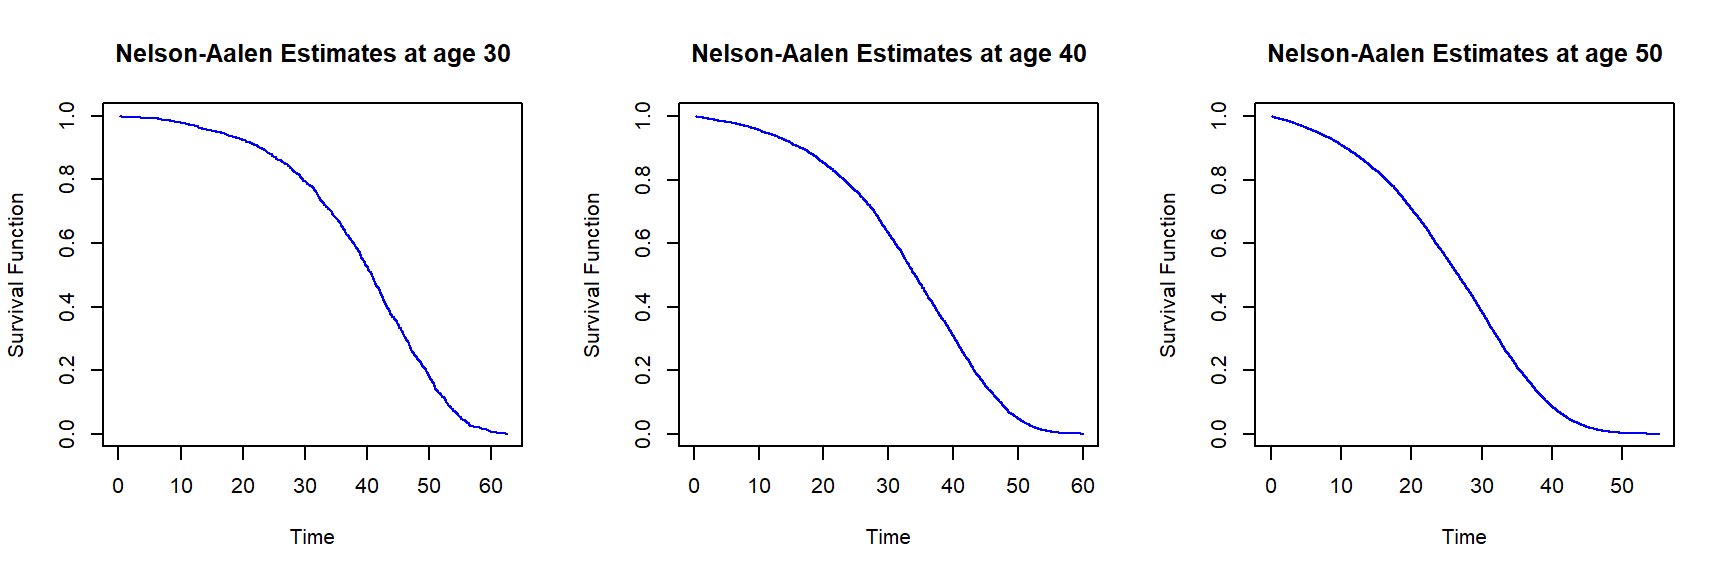 Nelson-Aalen survival function estimates for females of age 30 (left), 40 (middle) and 50 (right) based on the insurer dataset